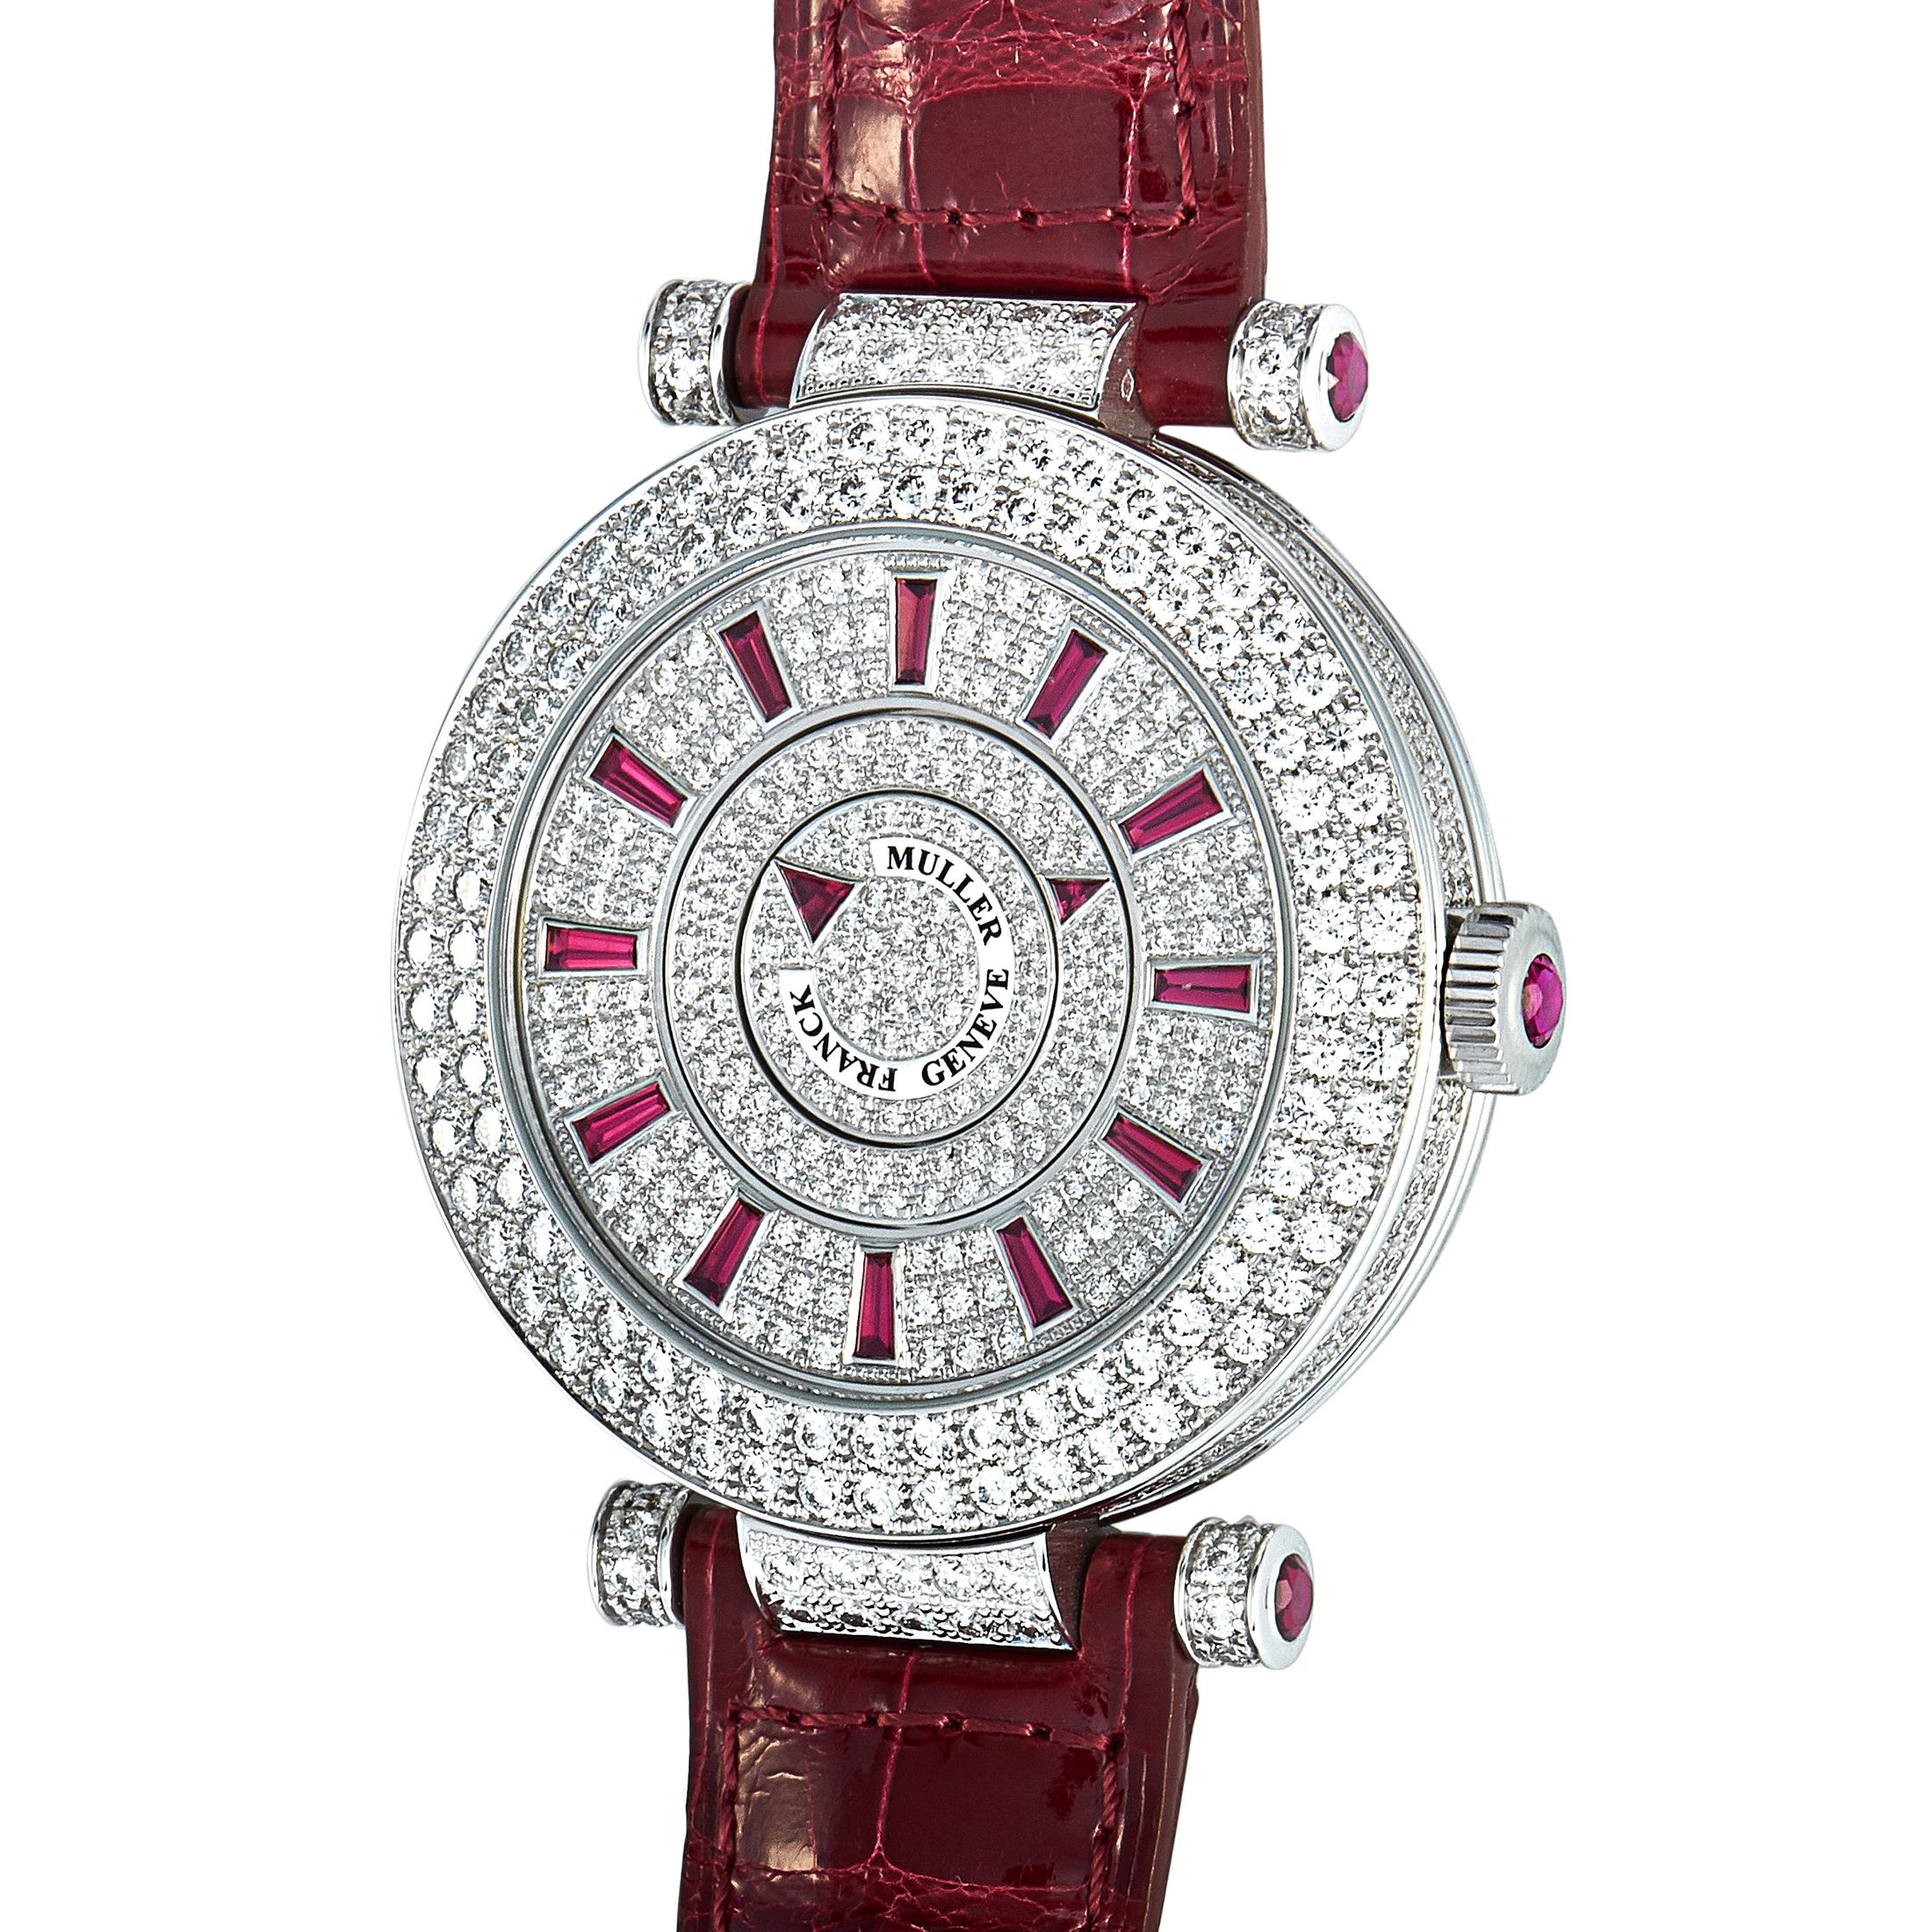 The Franck Muller Double Mystery, reference number DM 42 D 2R CD-Red, is presented with a diamond-set 18K white gold case that boasts see-through back. The case is mounted onto a red leather strap fitted with a diamond-embellished tang buckle.